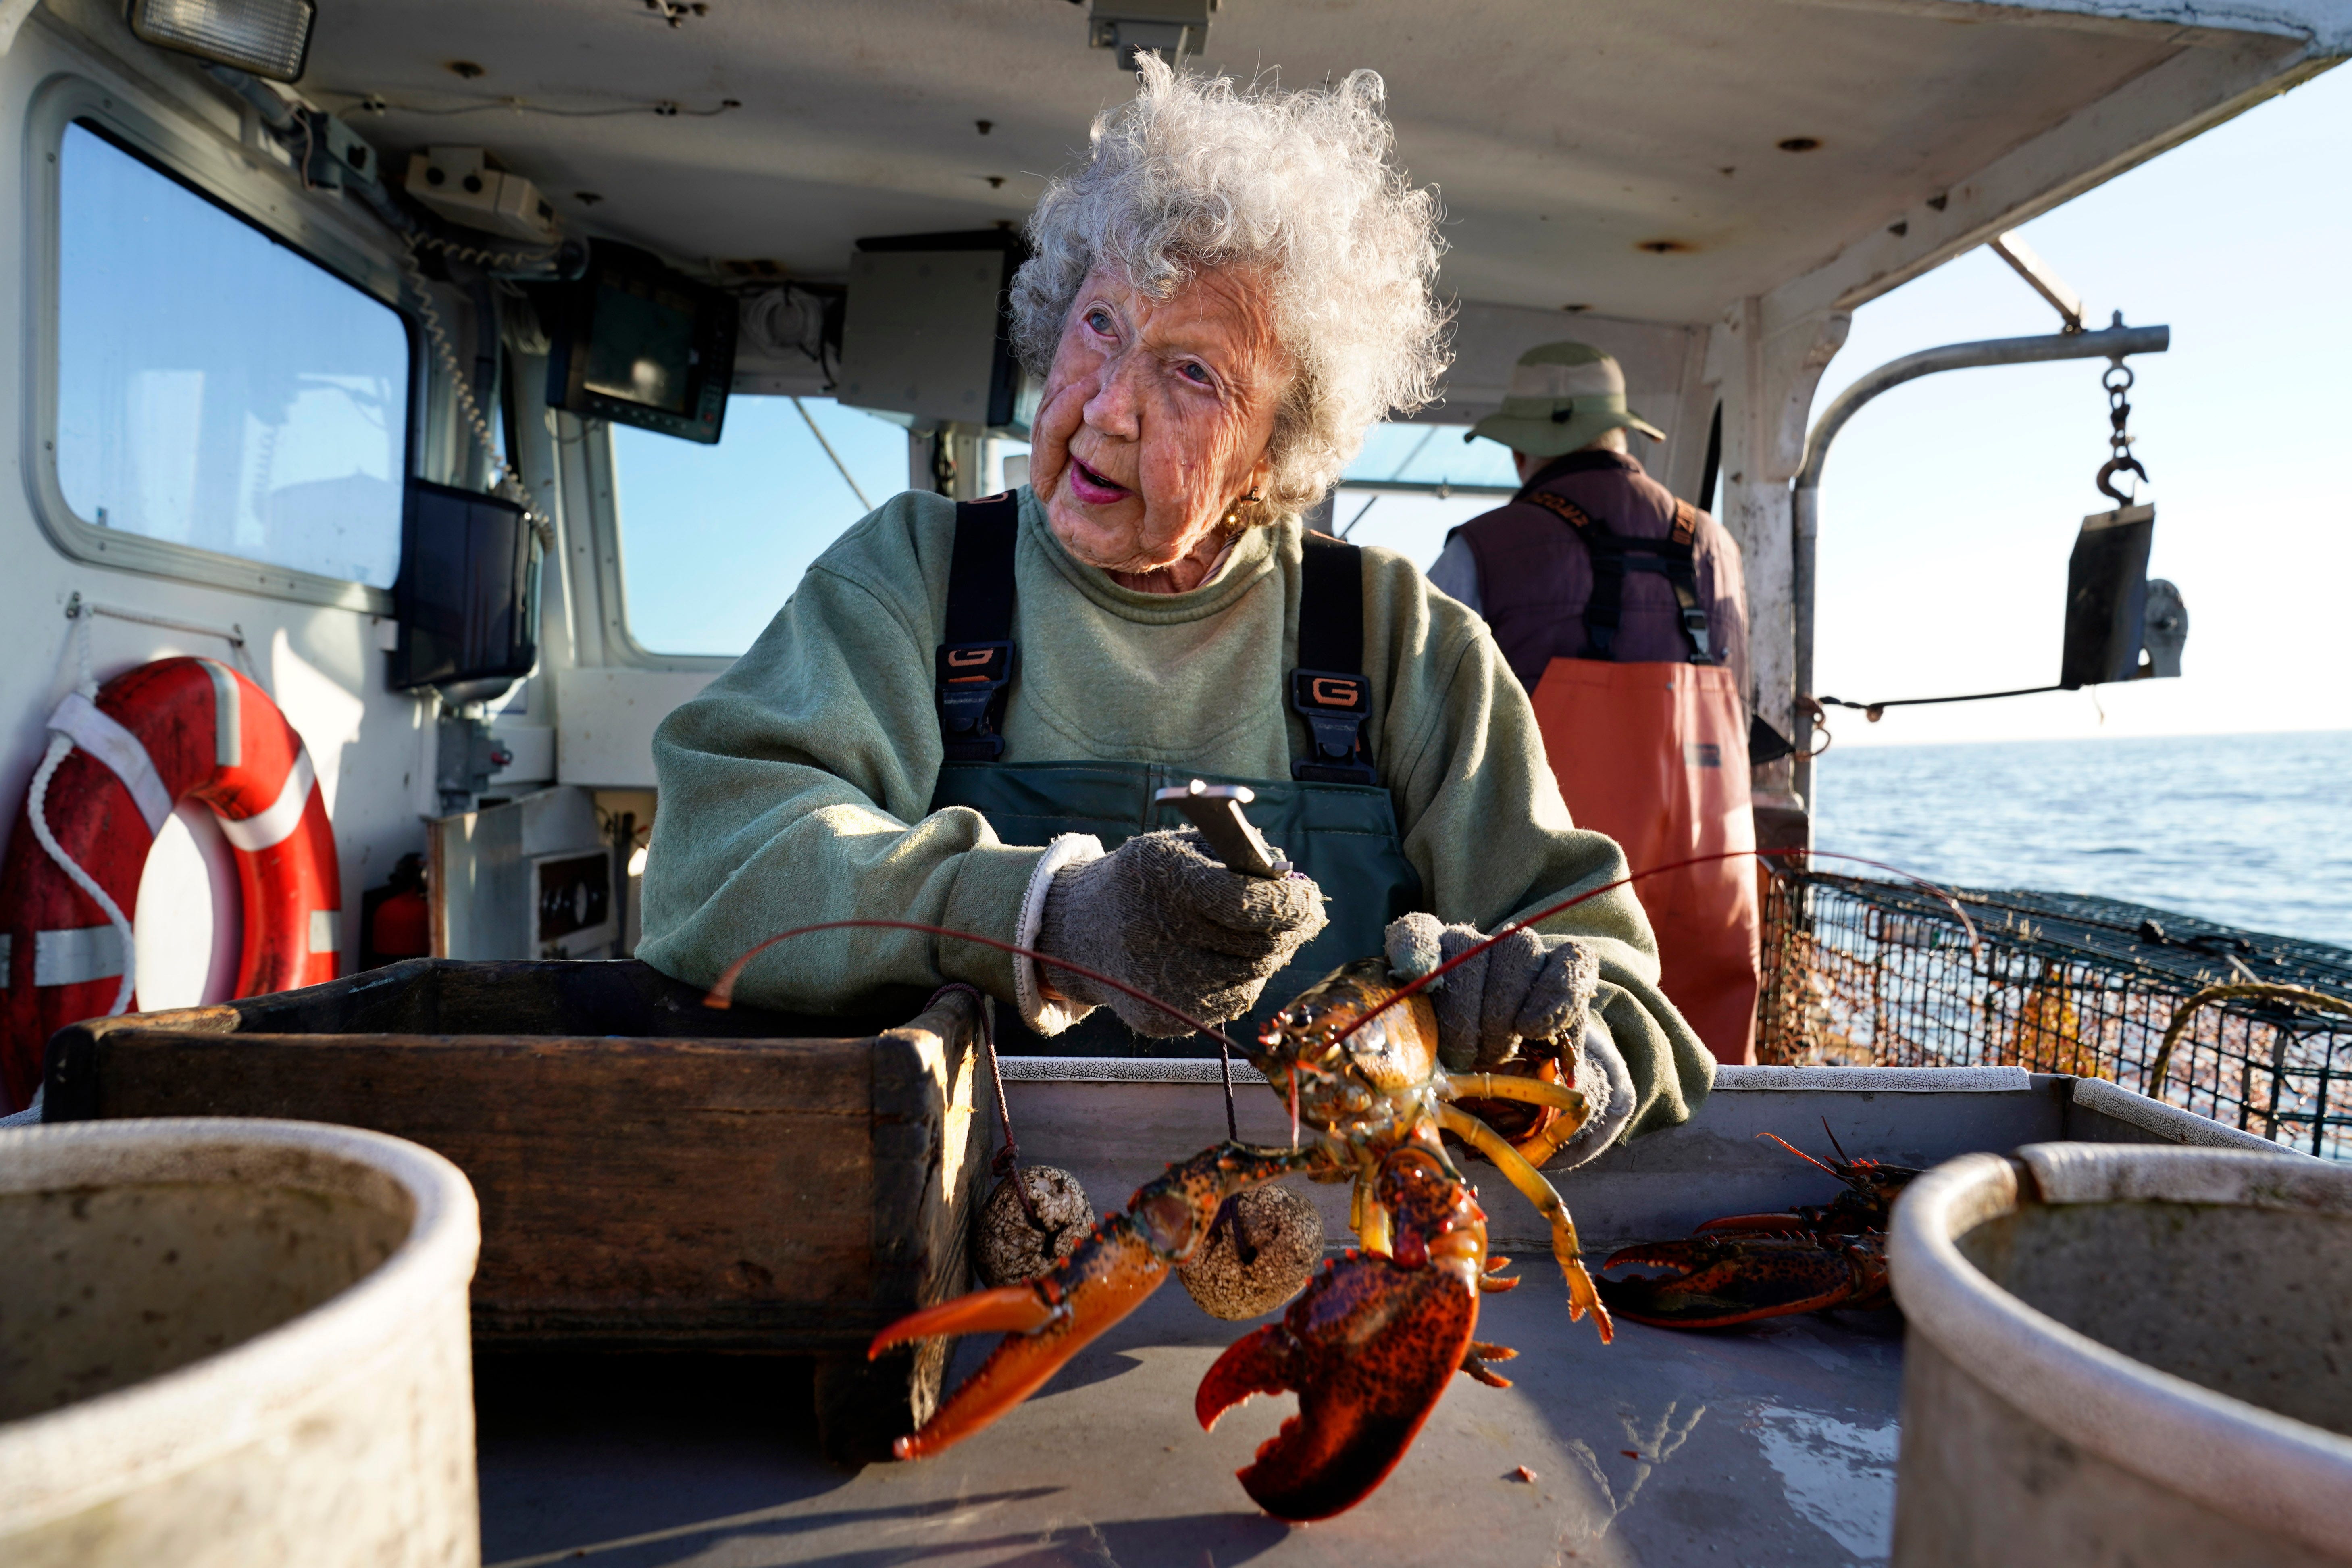 103-year-old Maine 'Lobster Lady' signs up for 95th year hauling traps